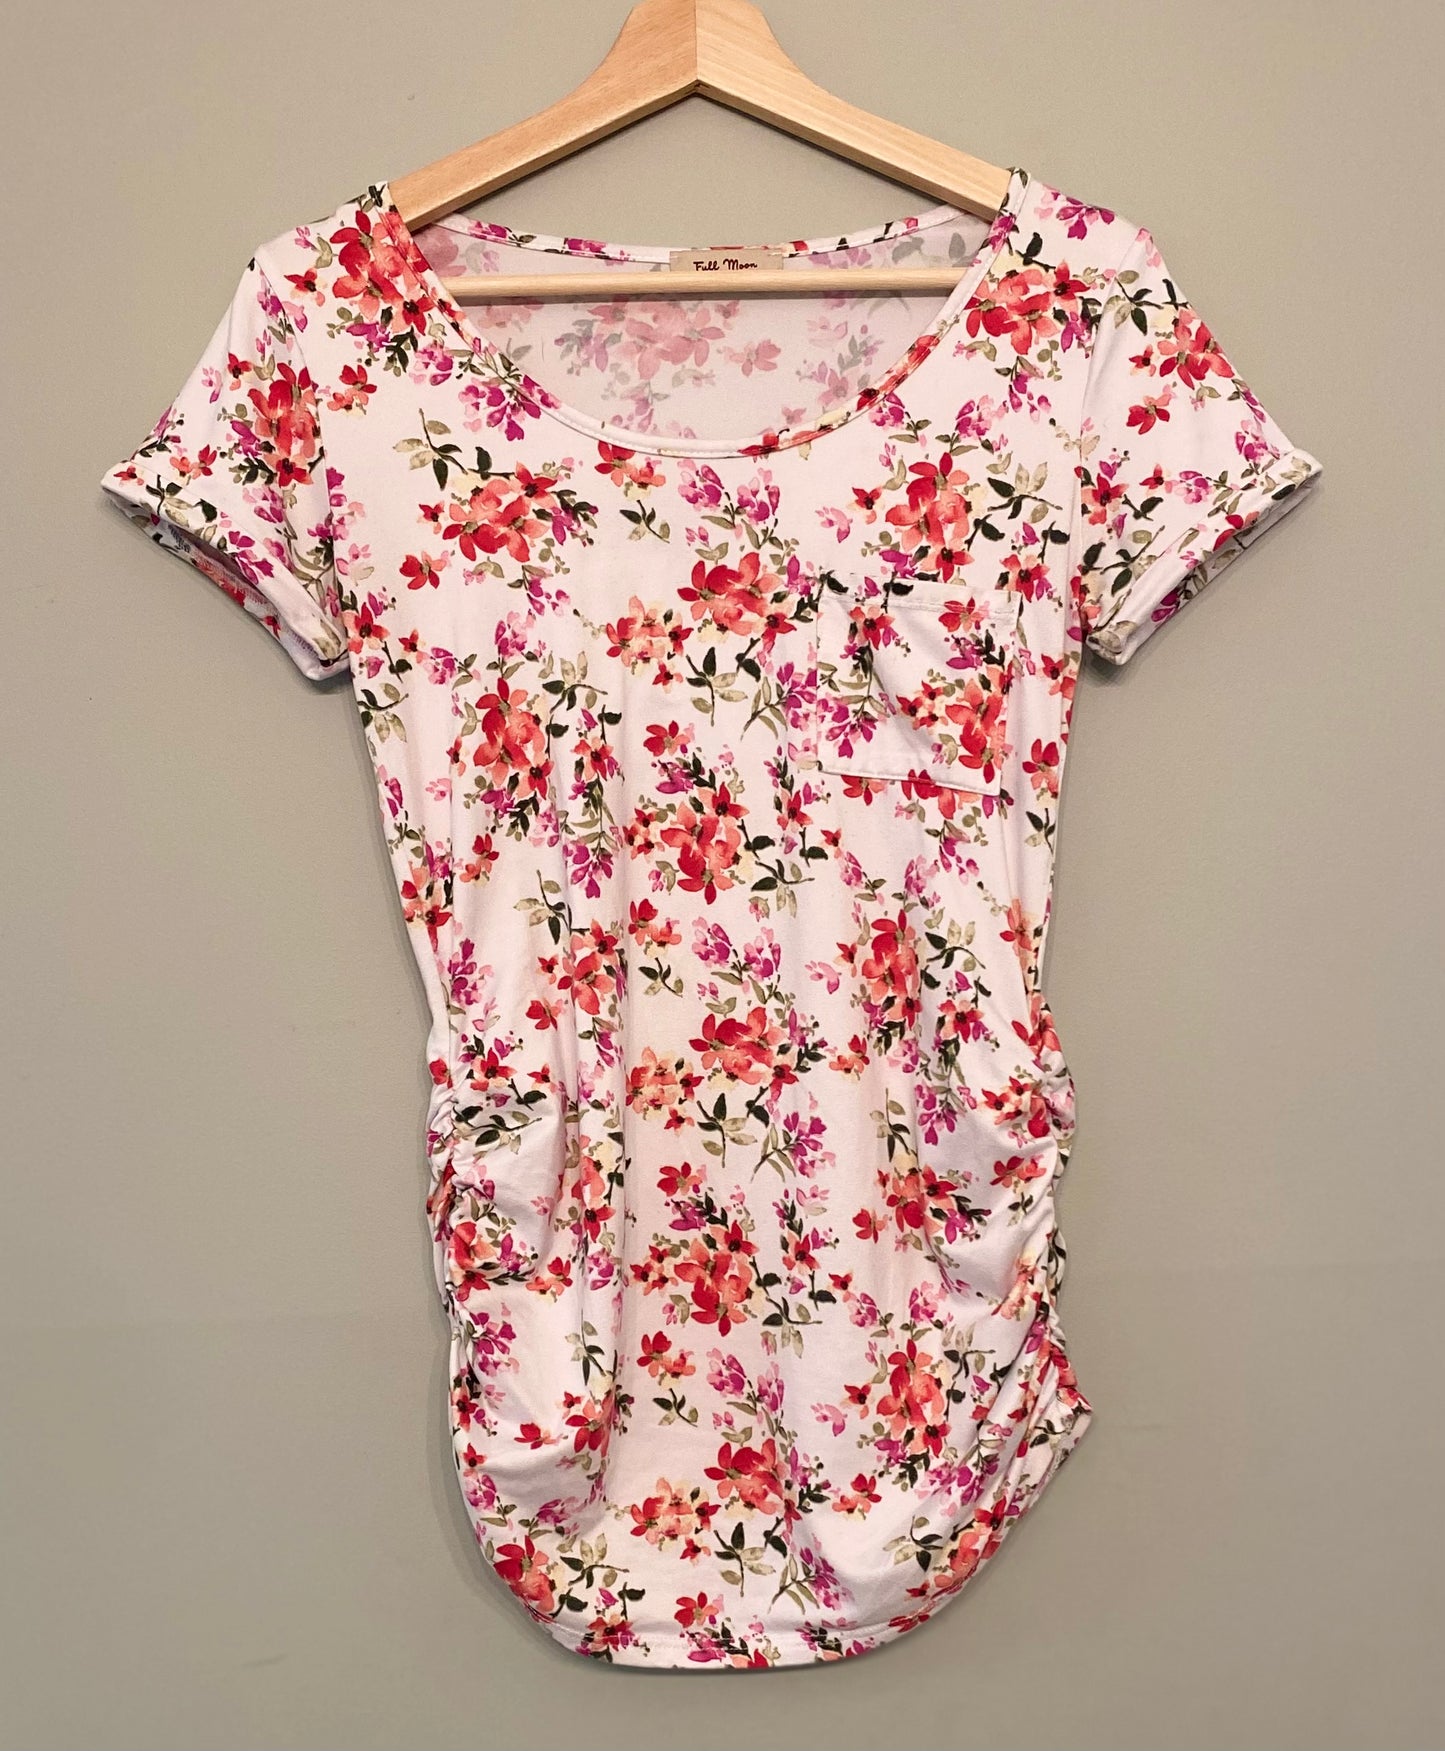 Full Moon Maternity XS (fits like S) Floral Shirt